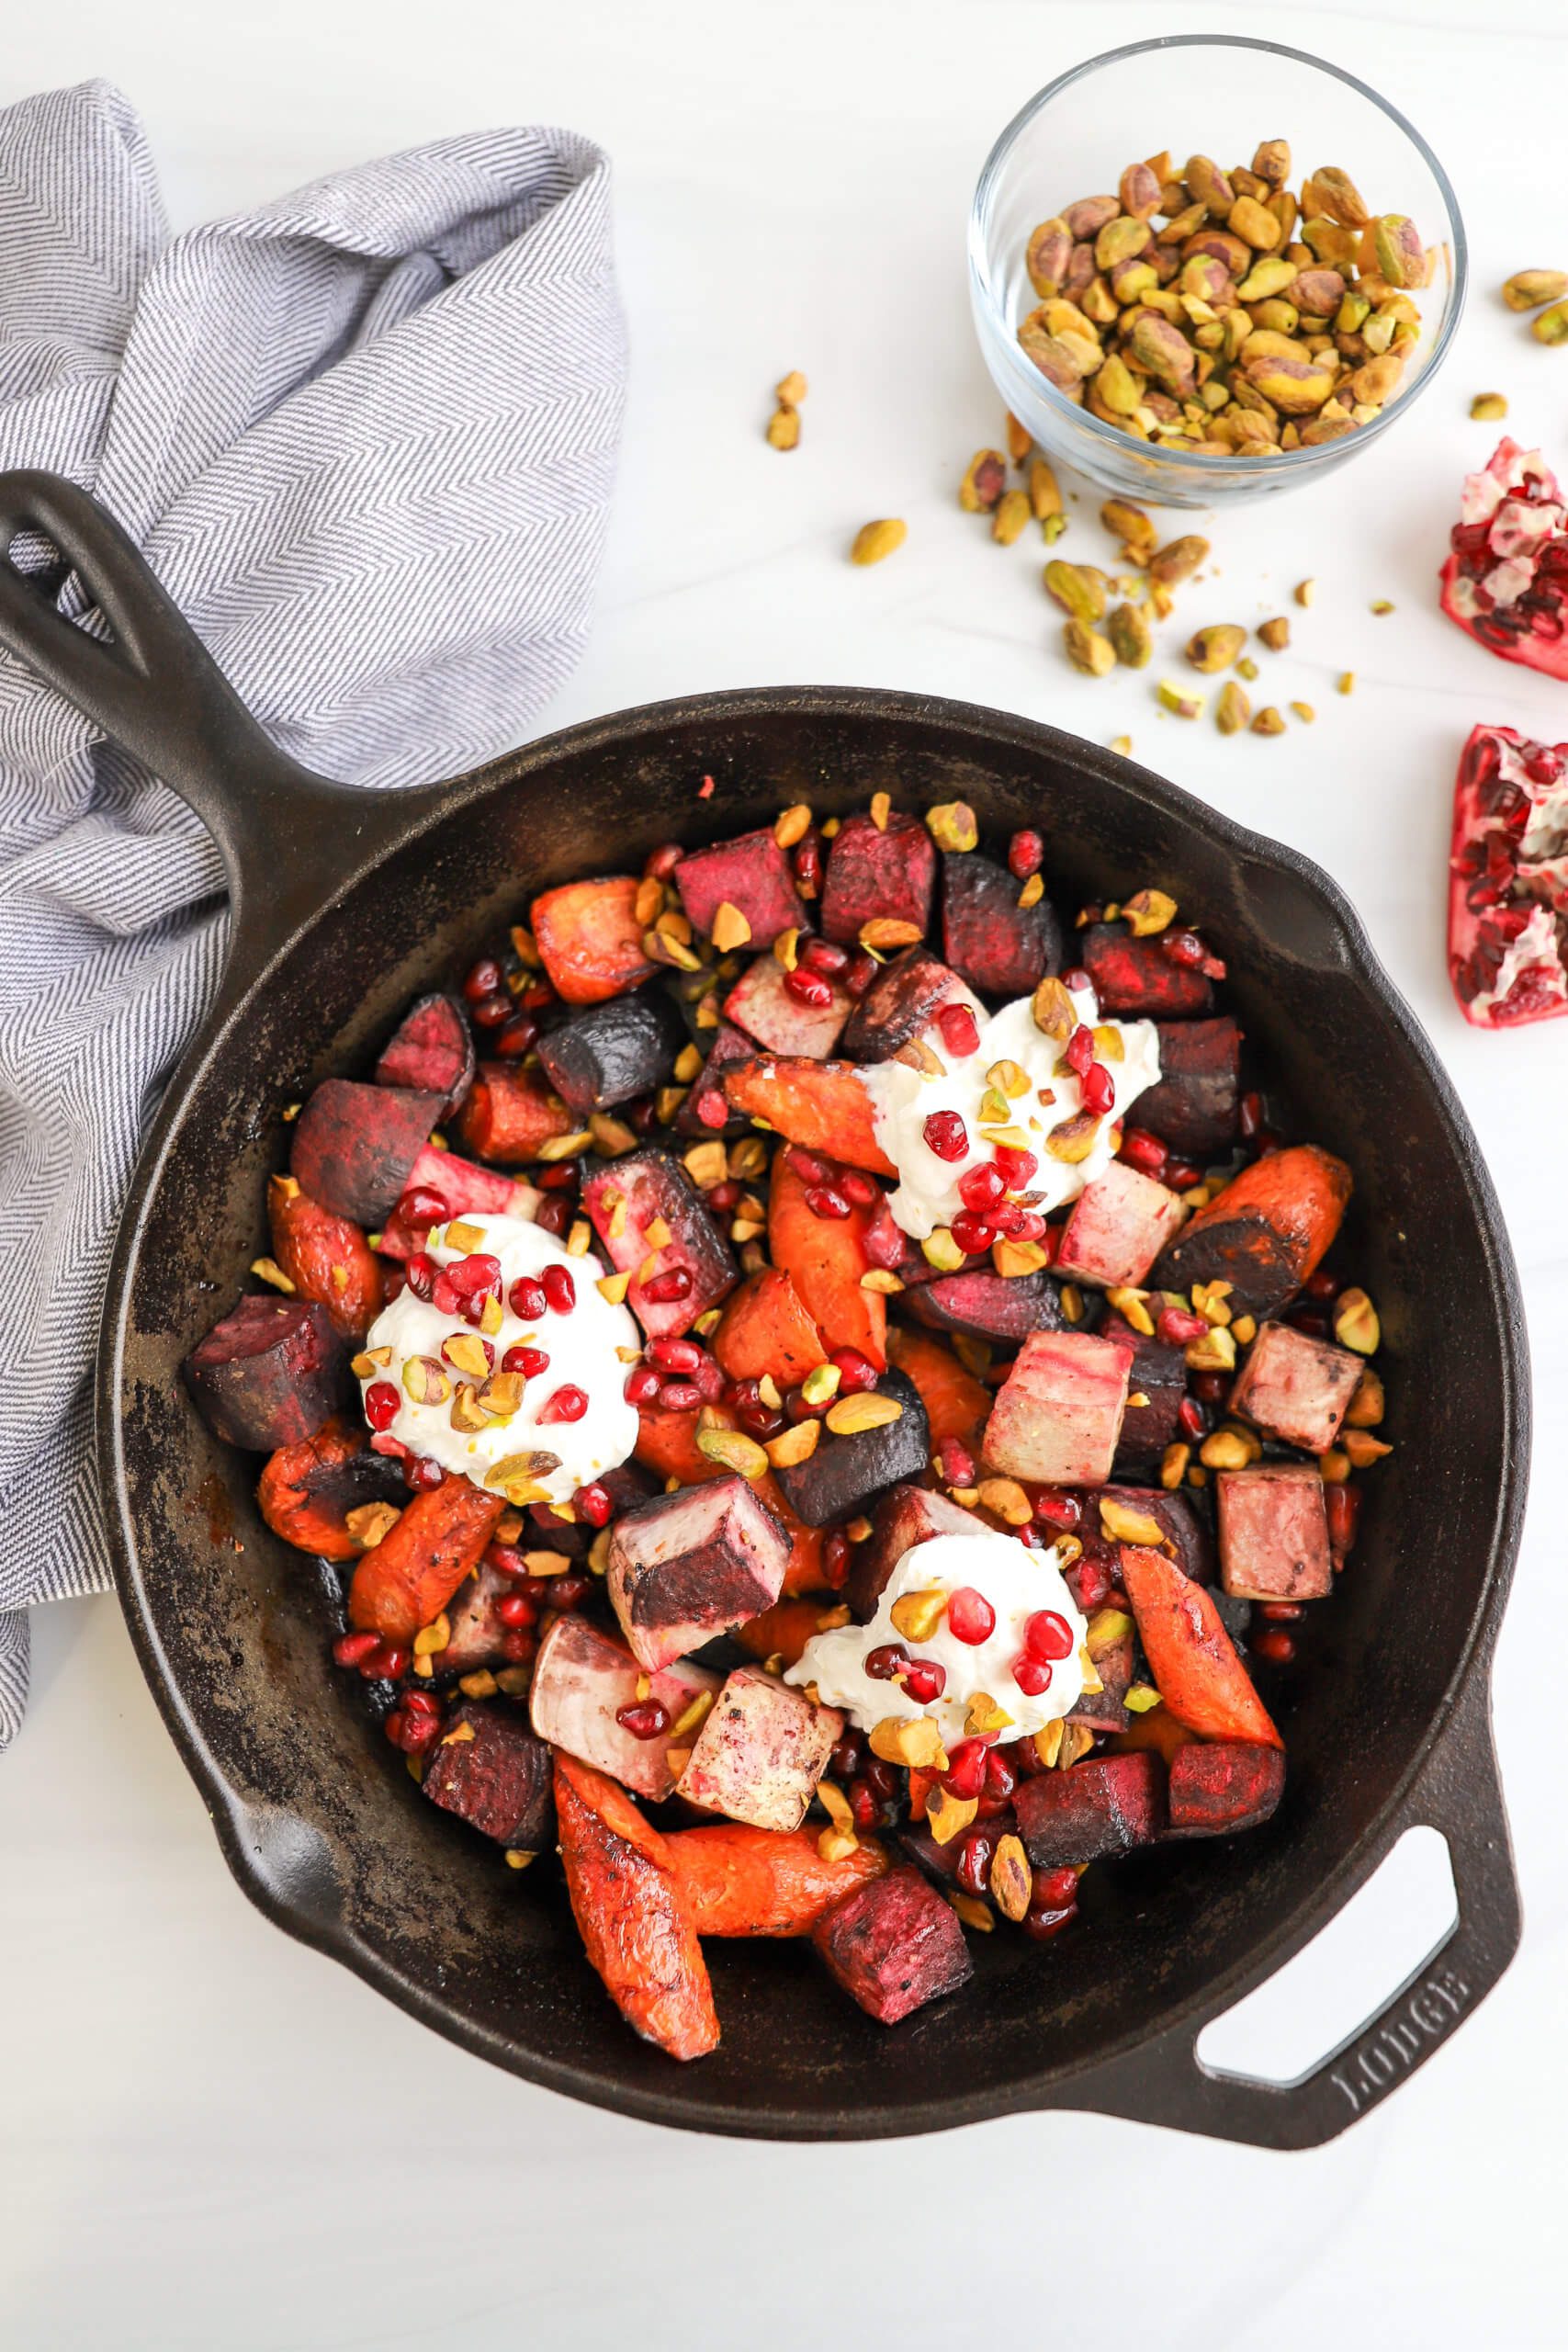 Pomegranate-Glazed Roasted Root Vegetables with Whipped Goat Cheese